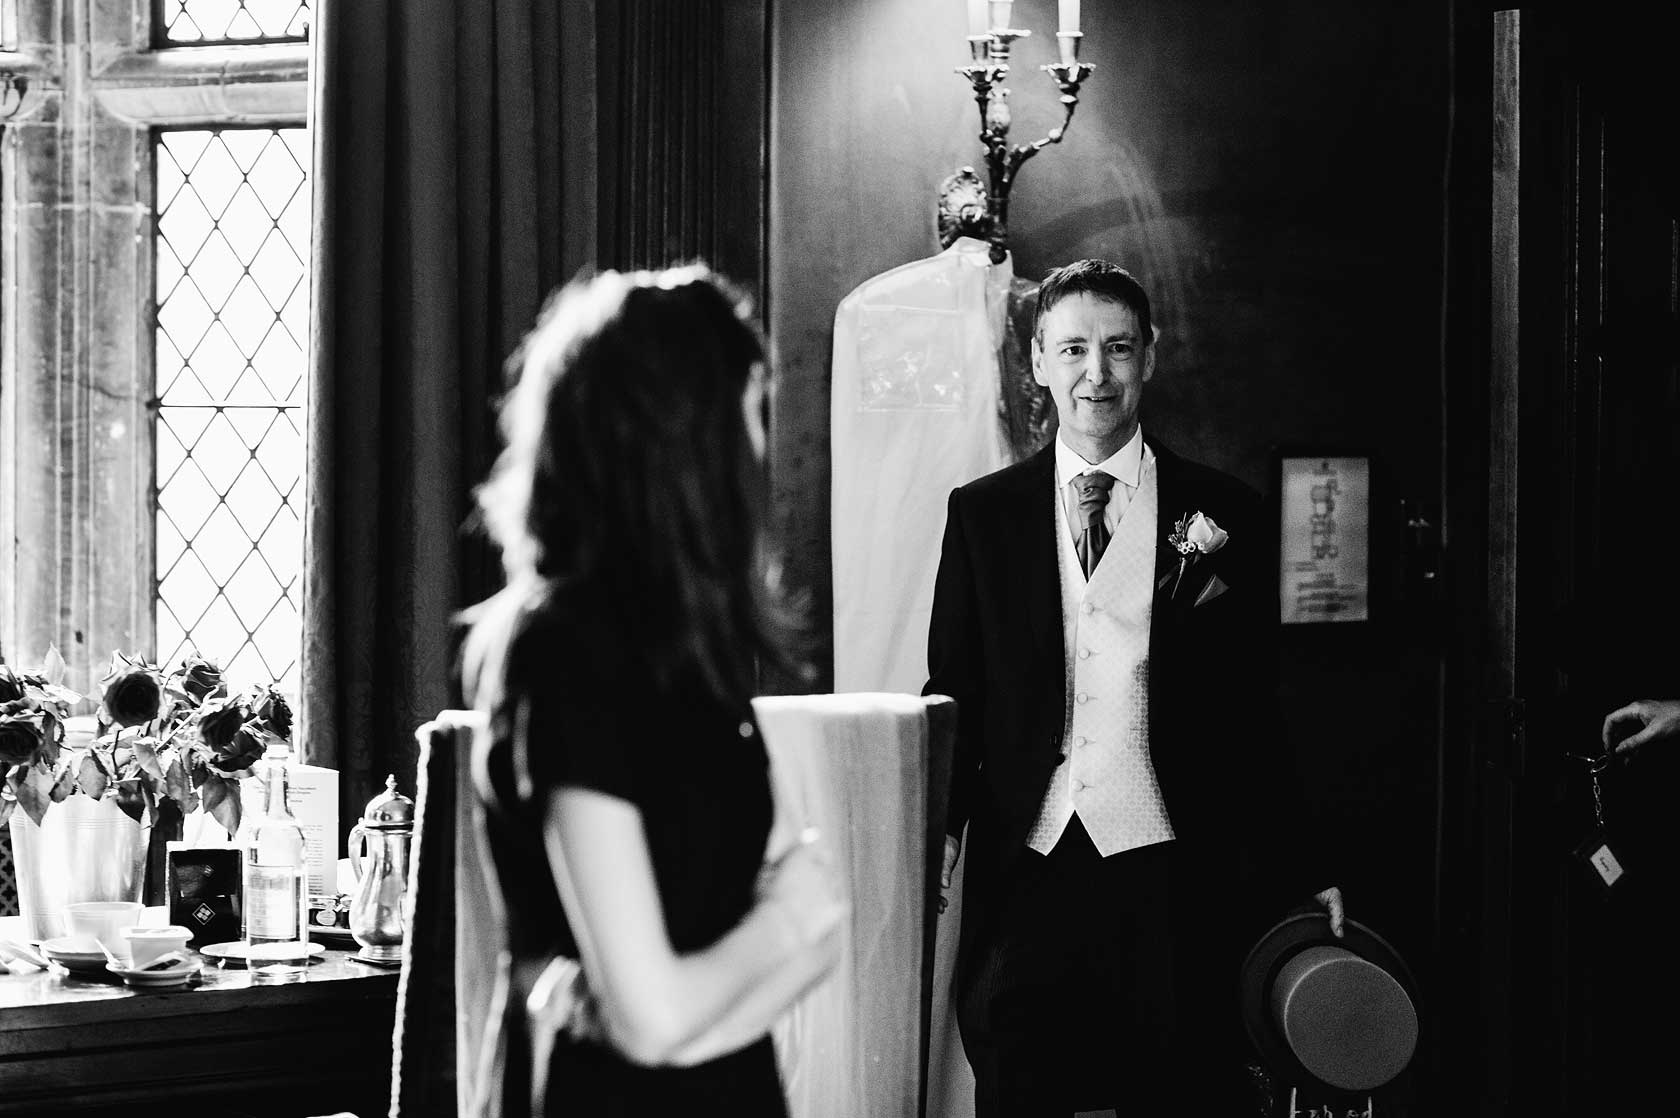 Reportage Wedding Photography at Great Fosters